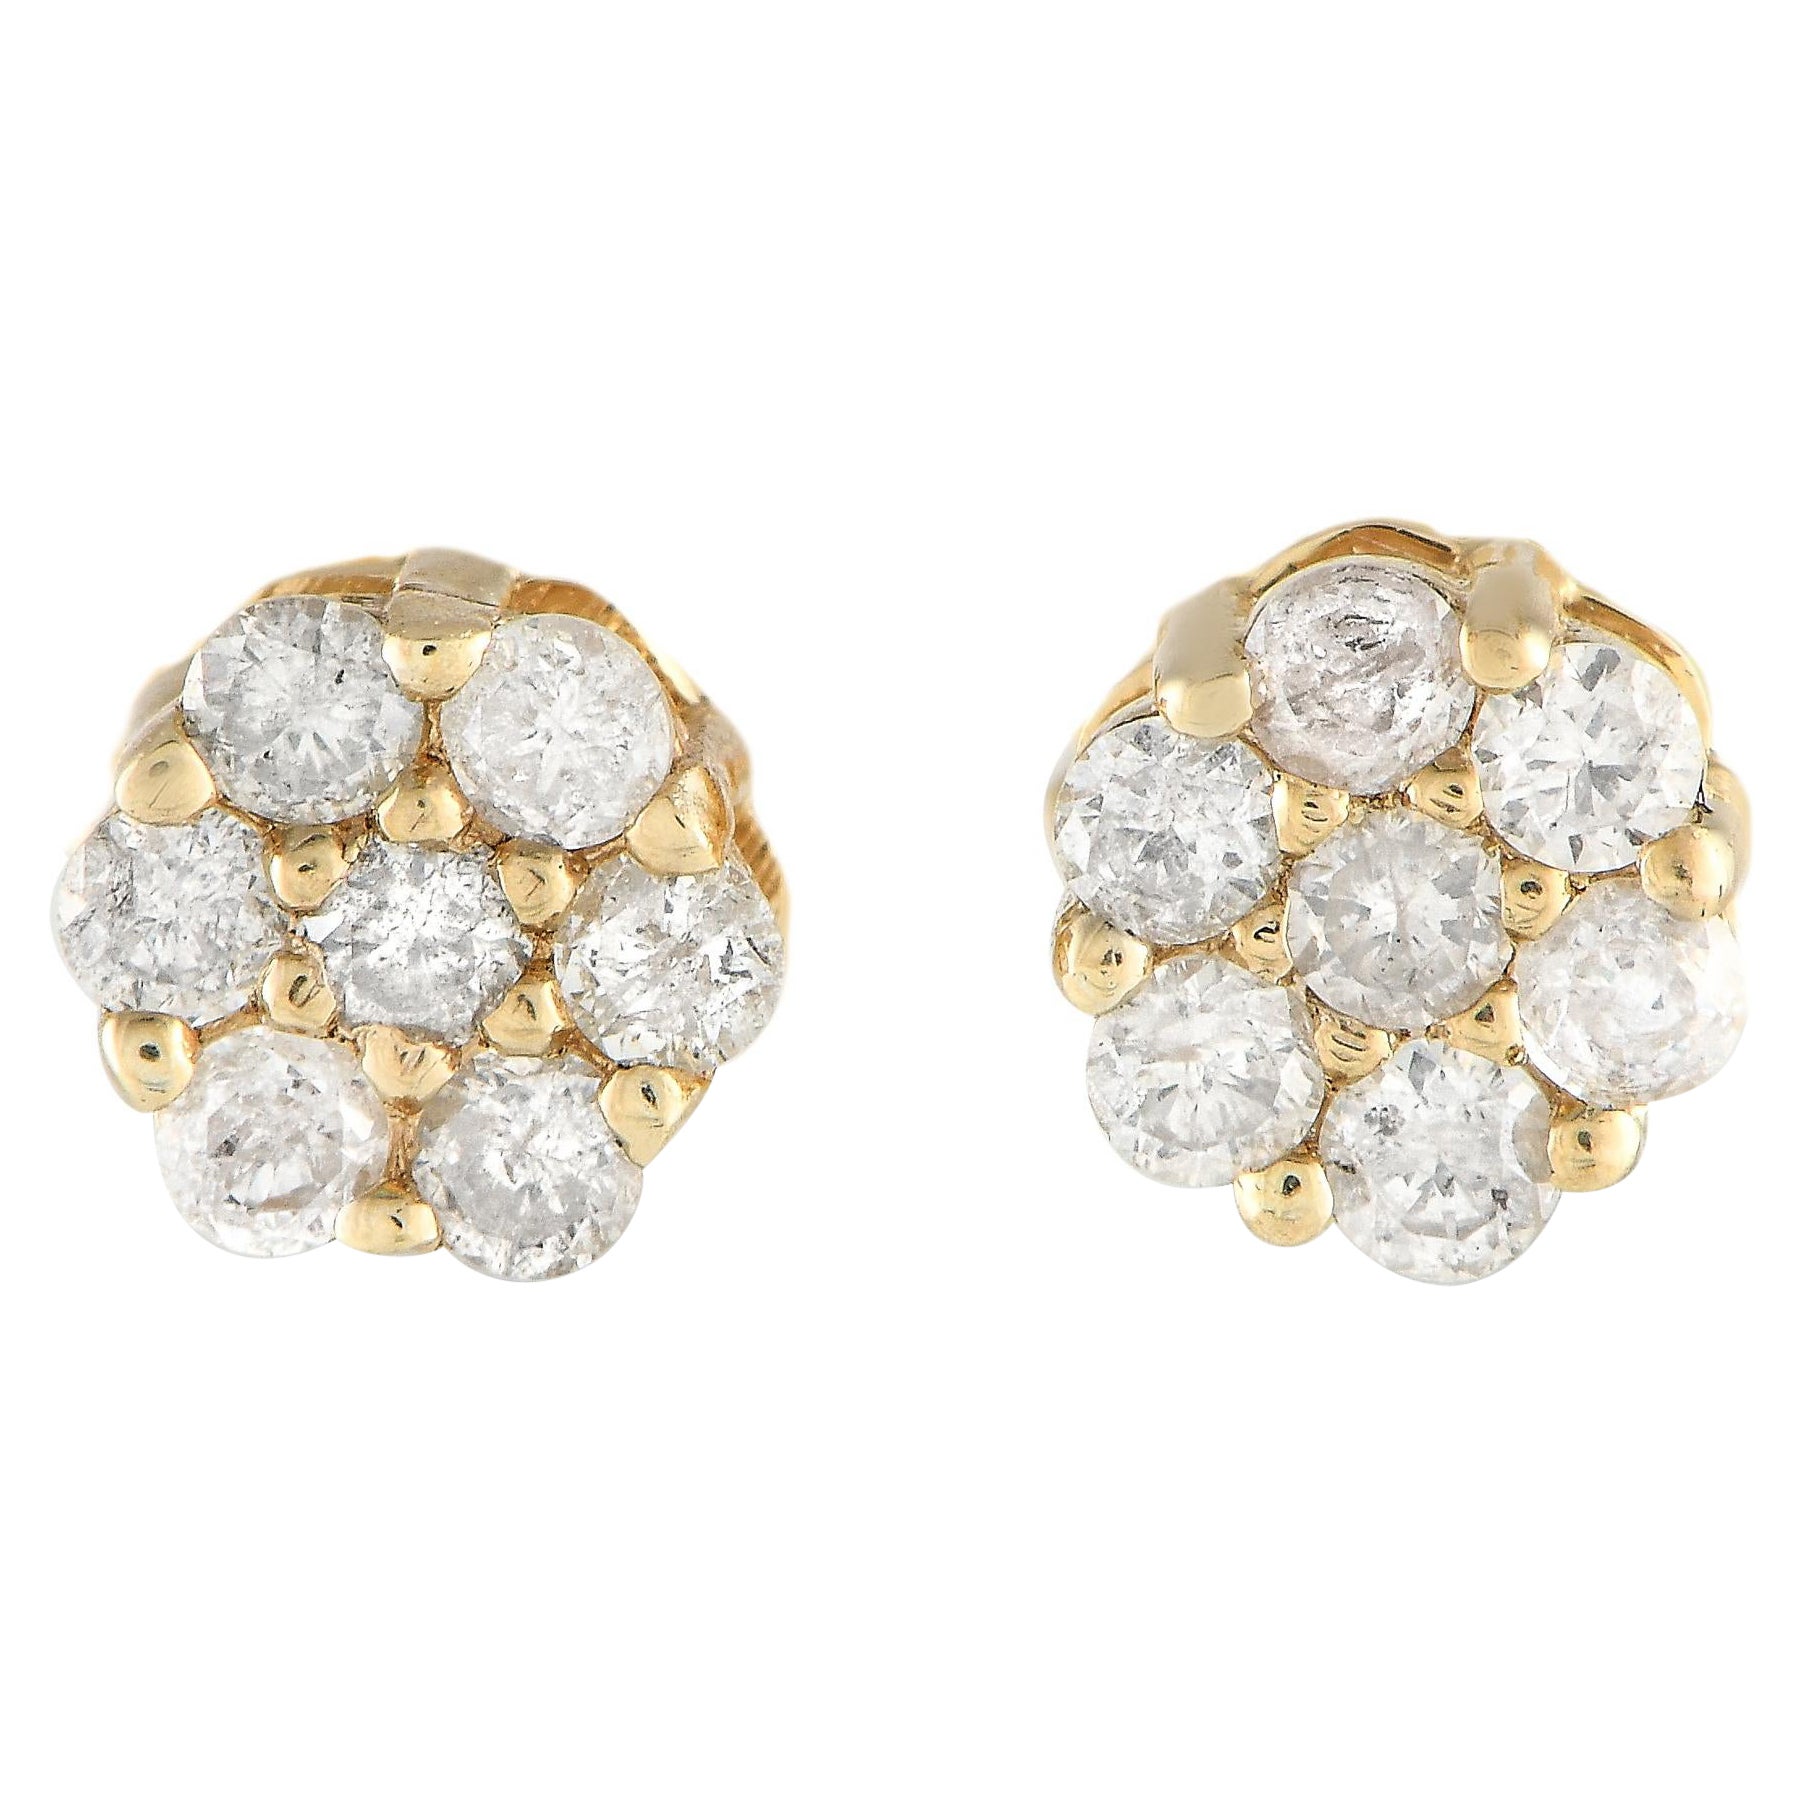 LB Exclusive 14K Yellow Gold 0.25ct Diamond Cluster Stud Earrings For Sale